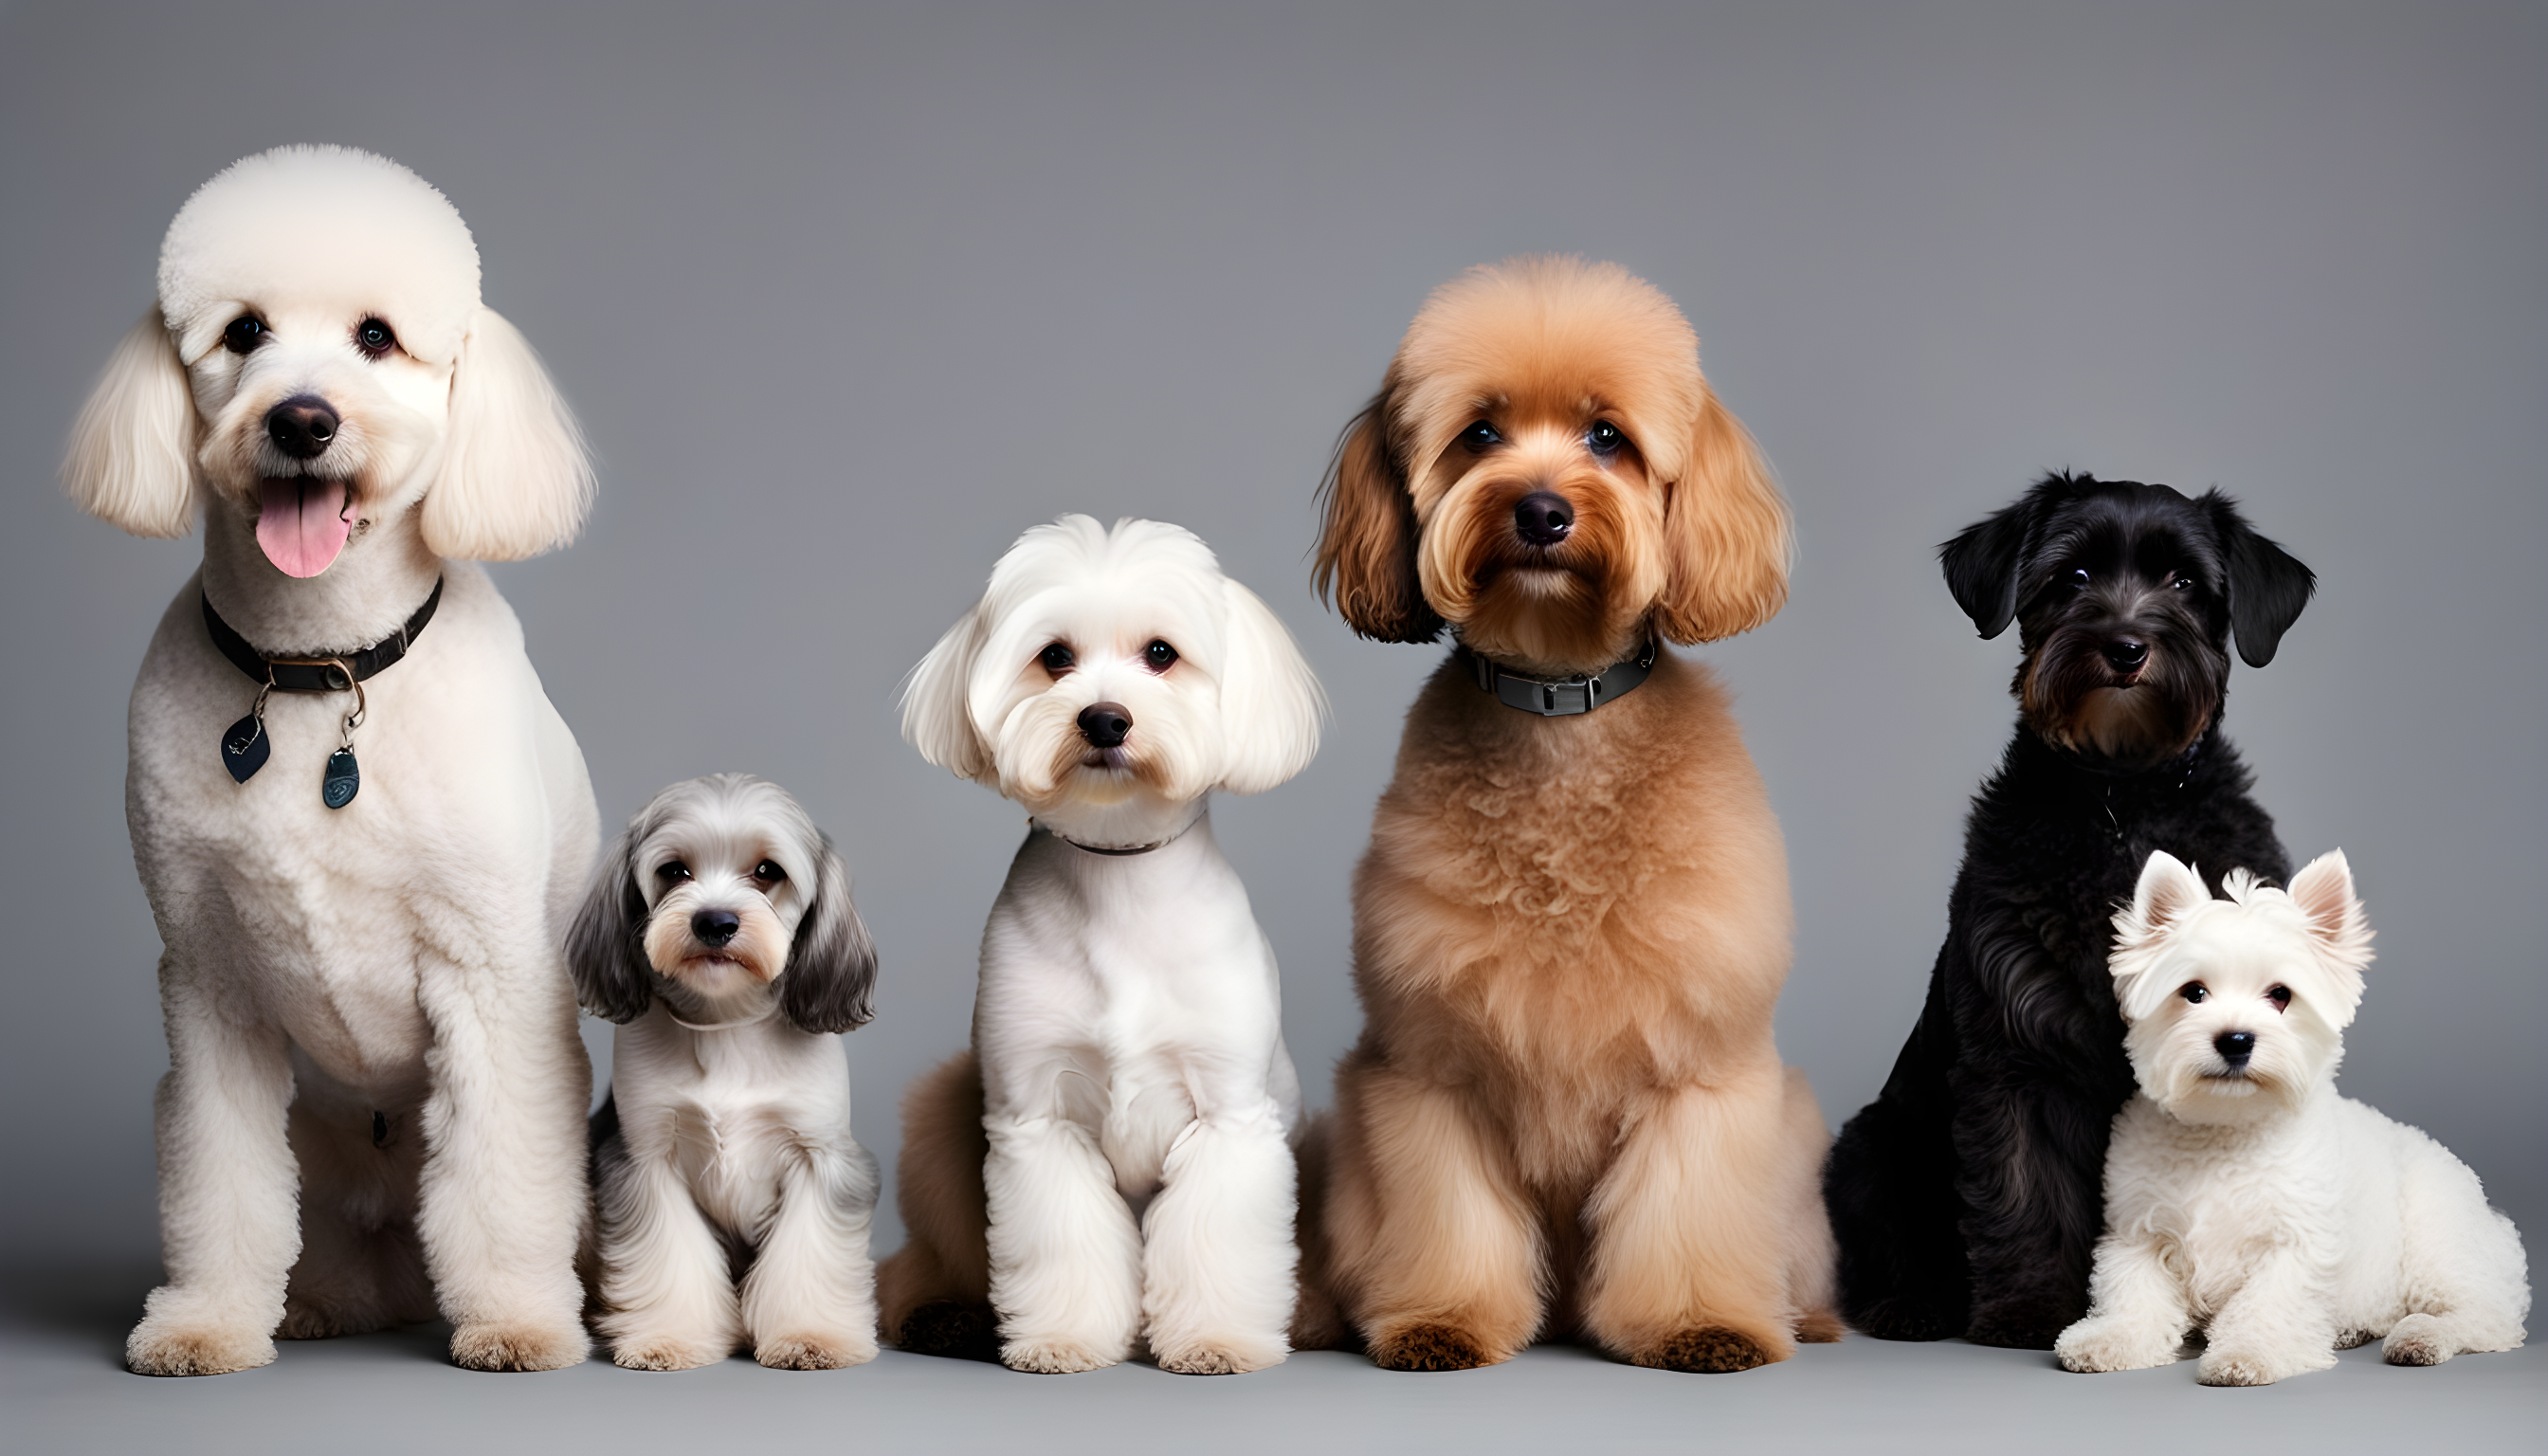 A line-up of different hypoallergenic dog breeds, including a Poodle, Schnauzer, and Bichon Frise, each looking adorable in their own right.